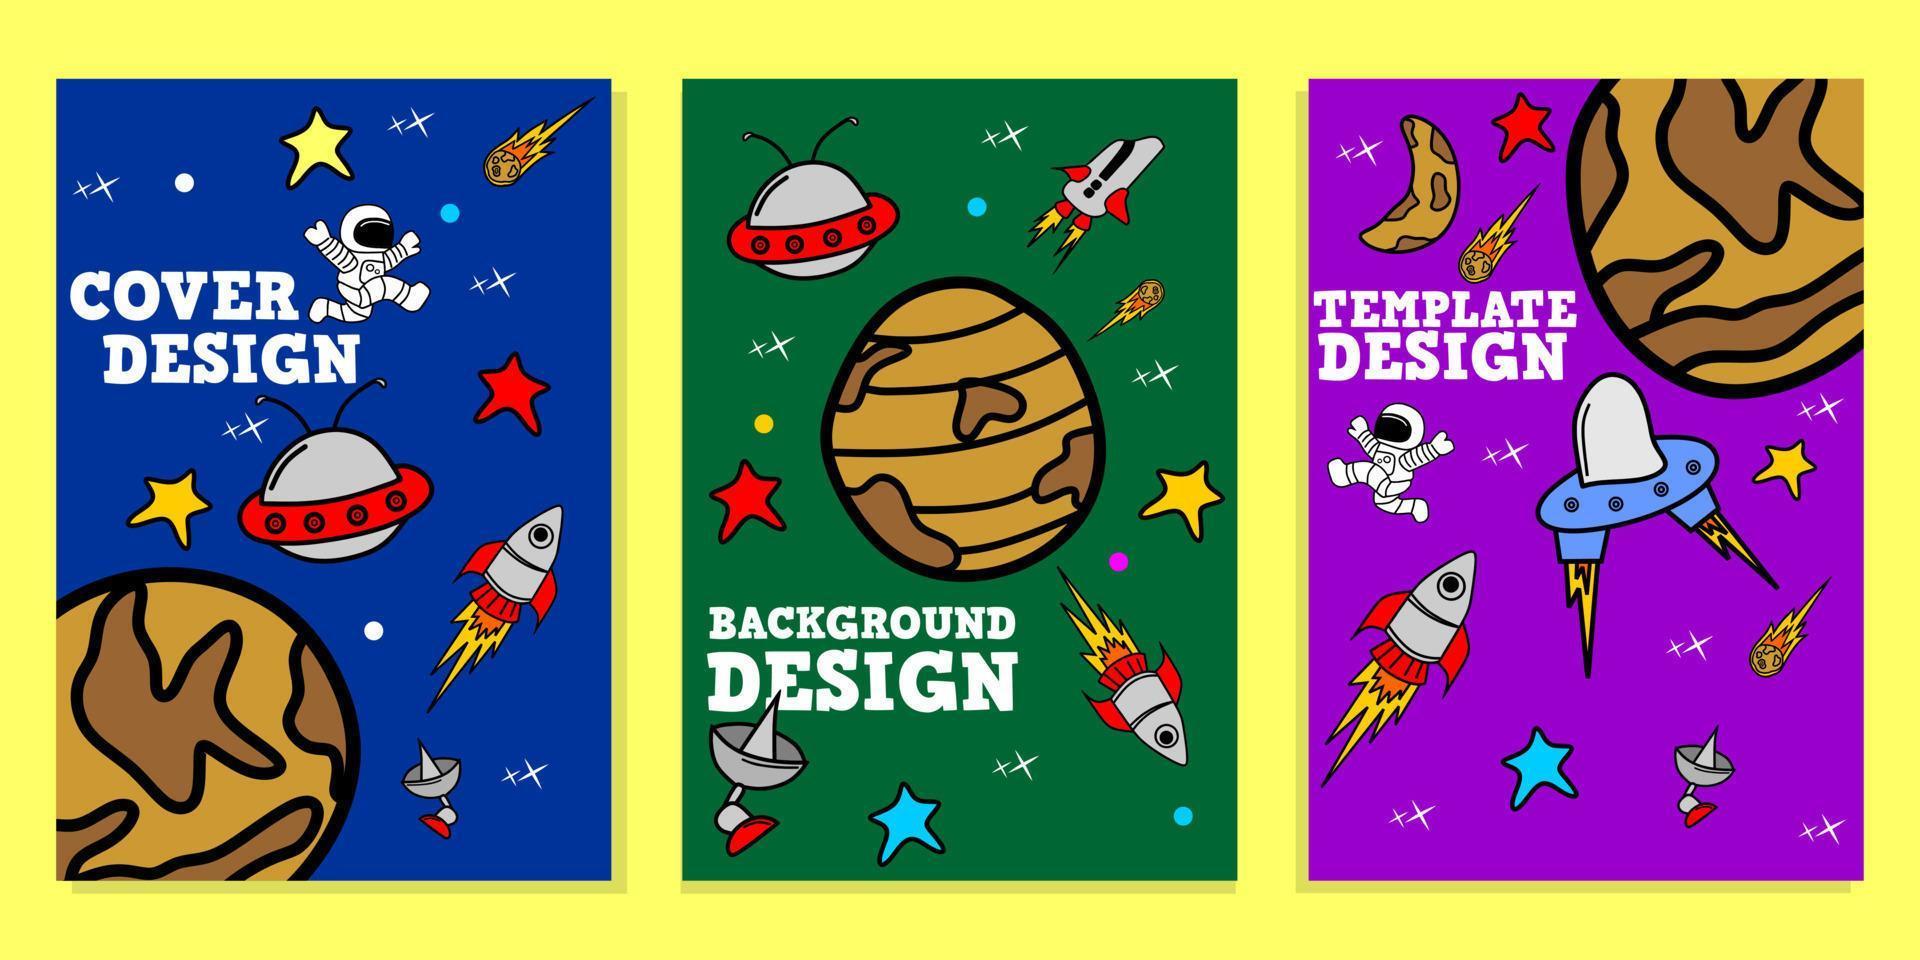 set of space cartoon theme cover templates with rocket, astronaut, planet and star elements. design for children's book cover vector